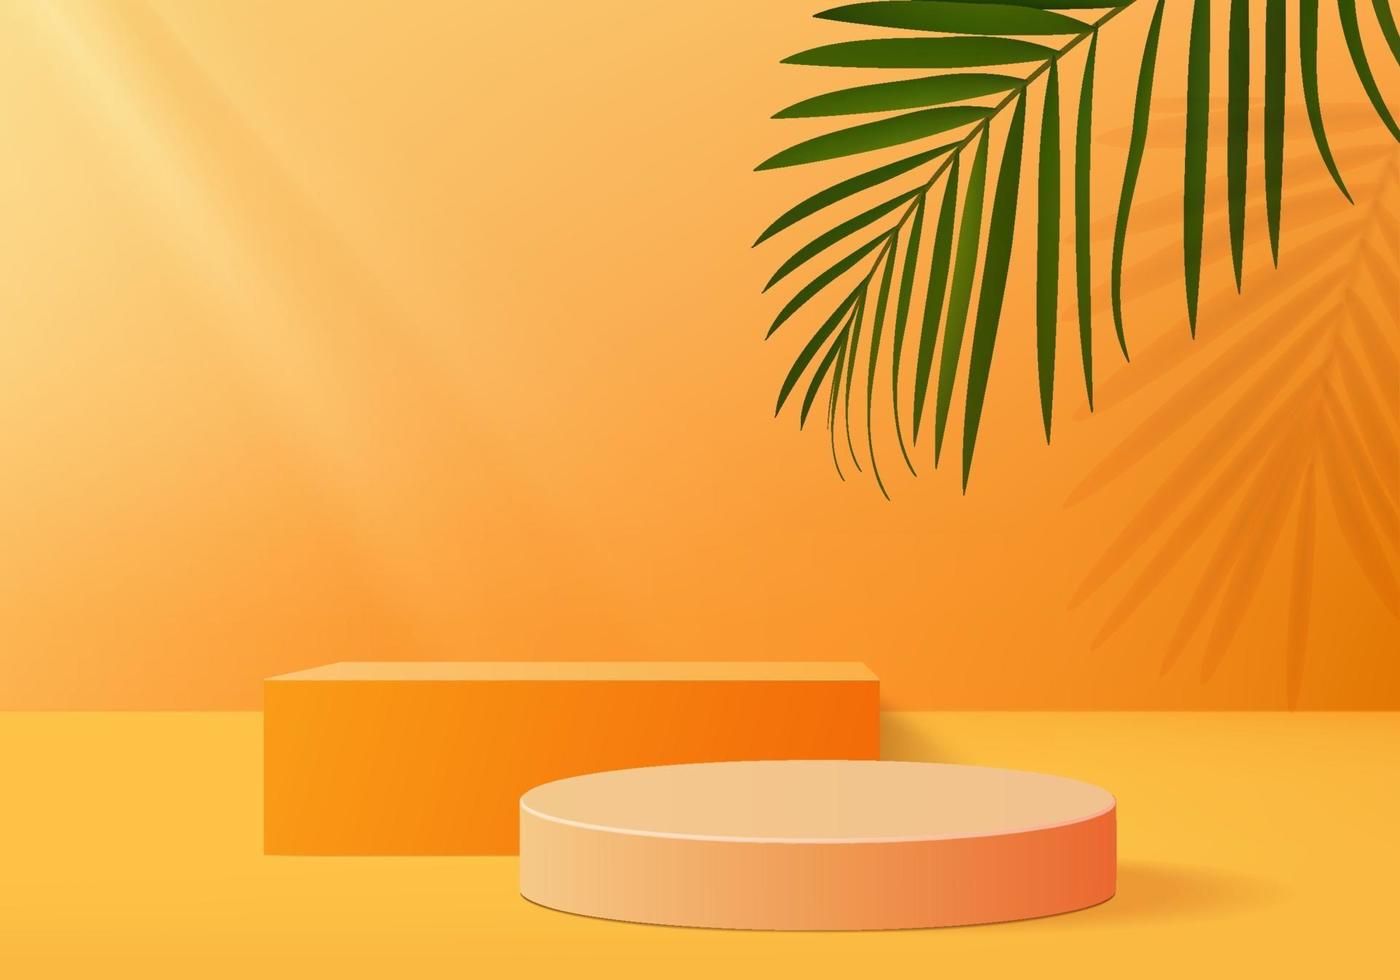 3d background products display podium scene with geometric platform. background vector 3d rendering with podium. stand to show cosmetic products. Stage showcase on pedestal display orange studio